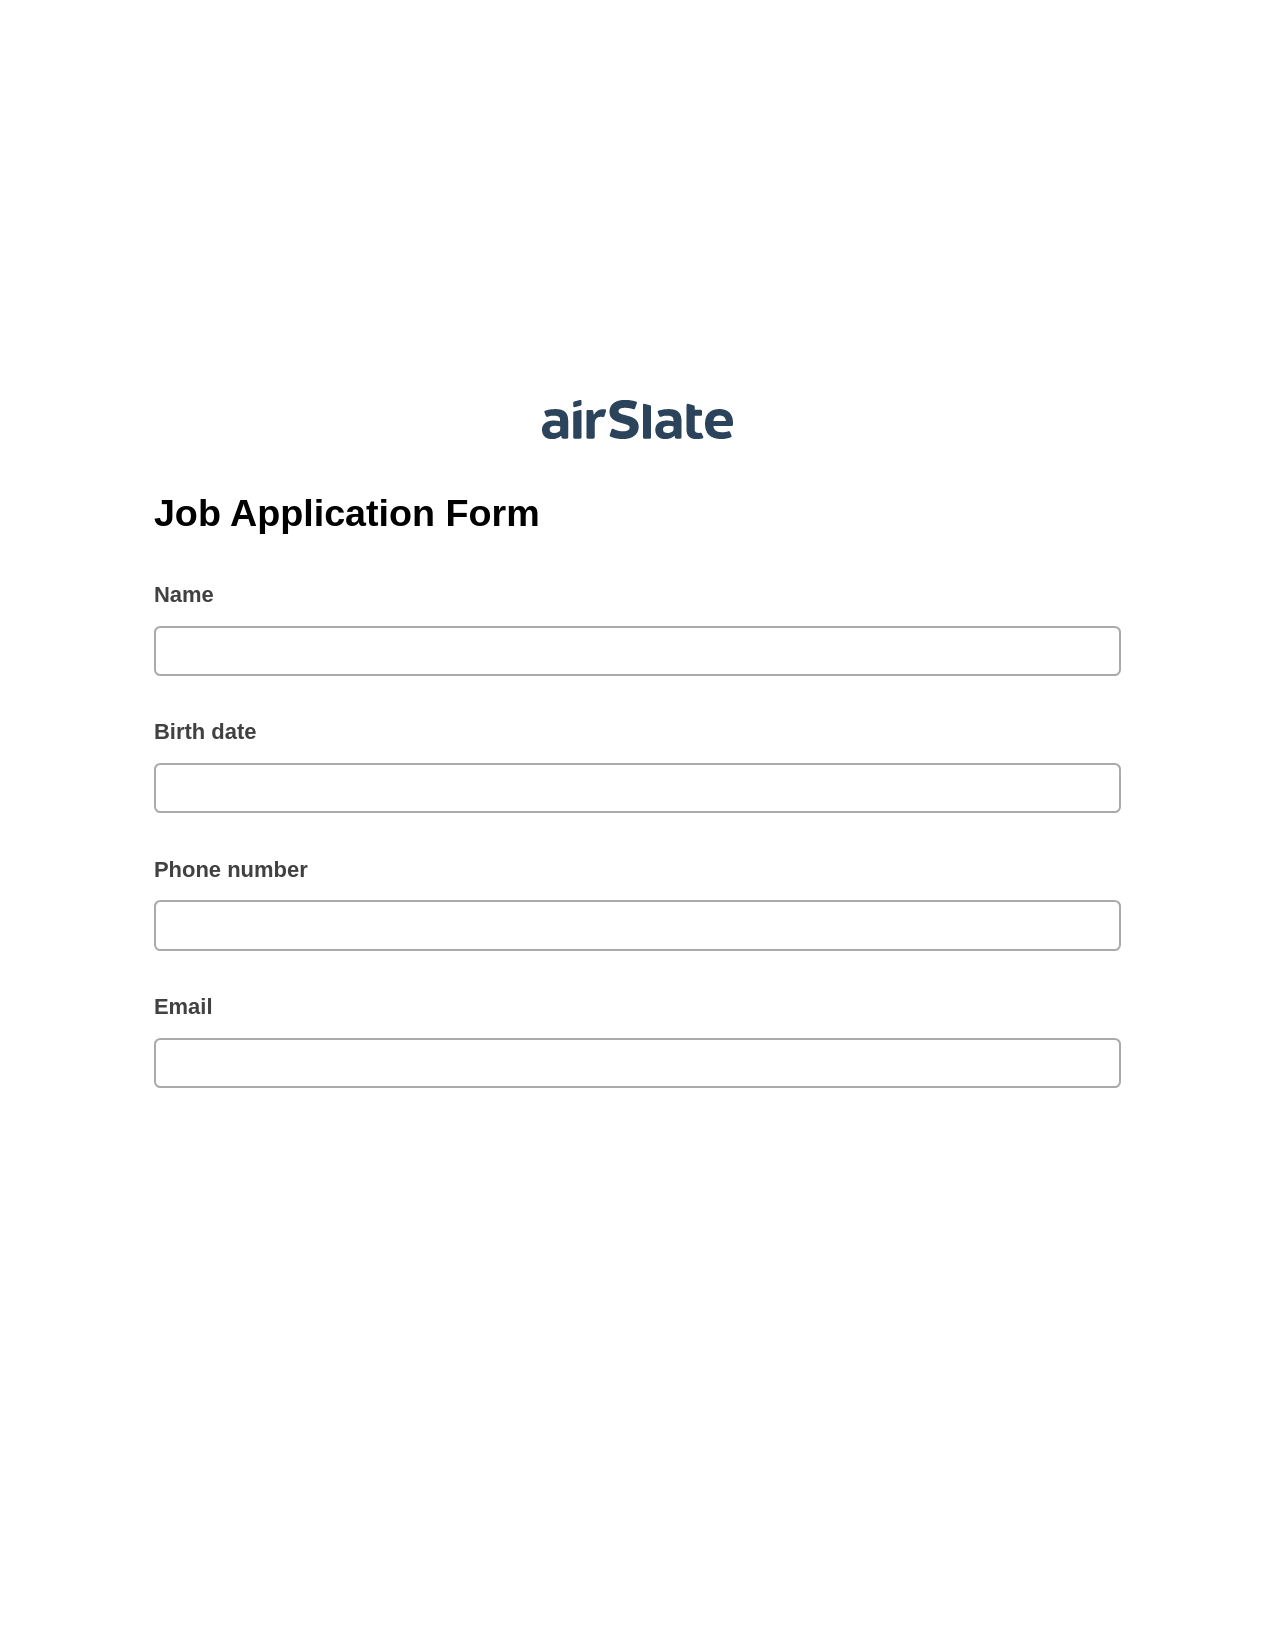 Multirole Job Application Form Pre-fill from CSV File Bot, System Bot - Create a Slate in another Flow, Webhook Postfinish Bot